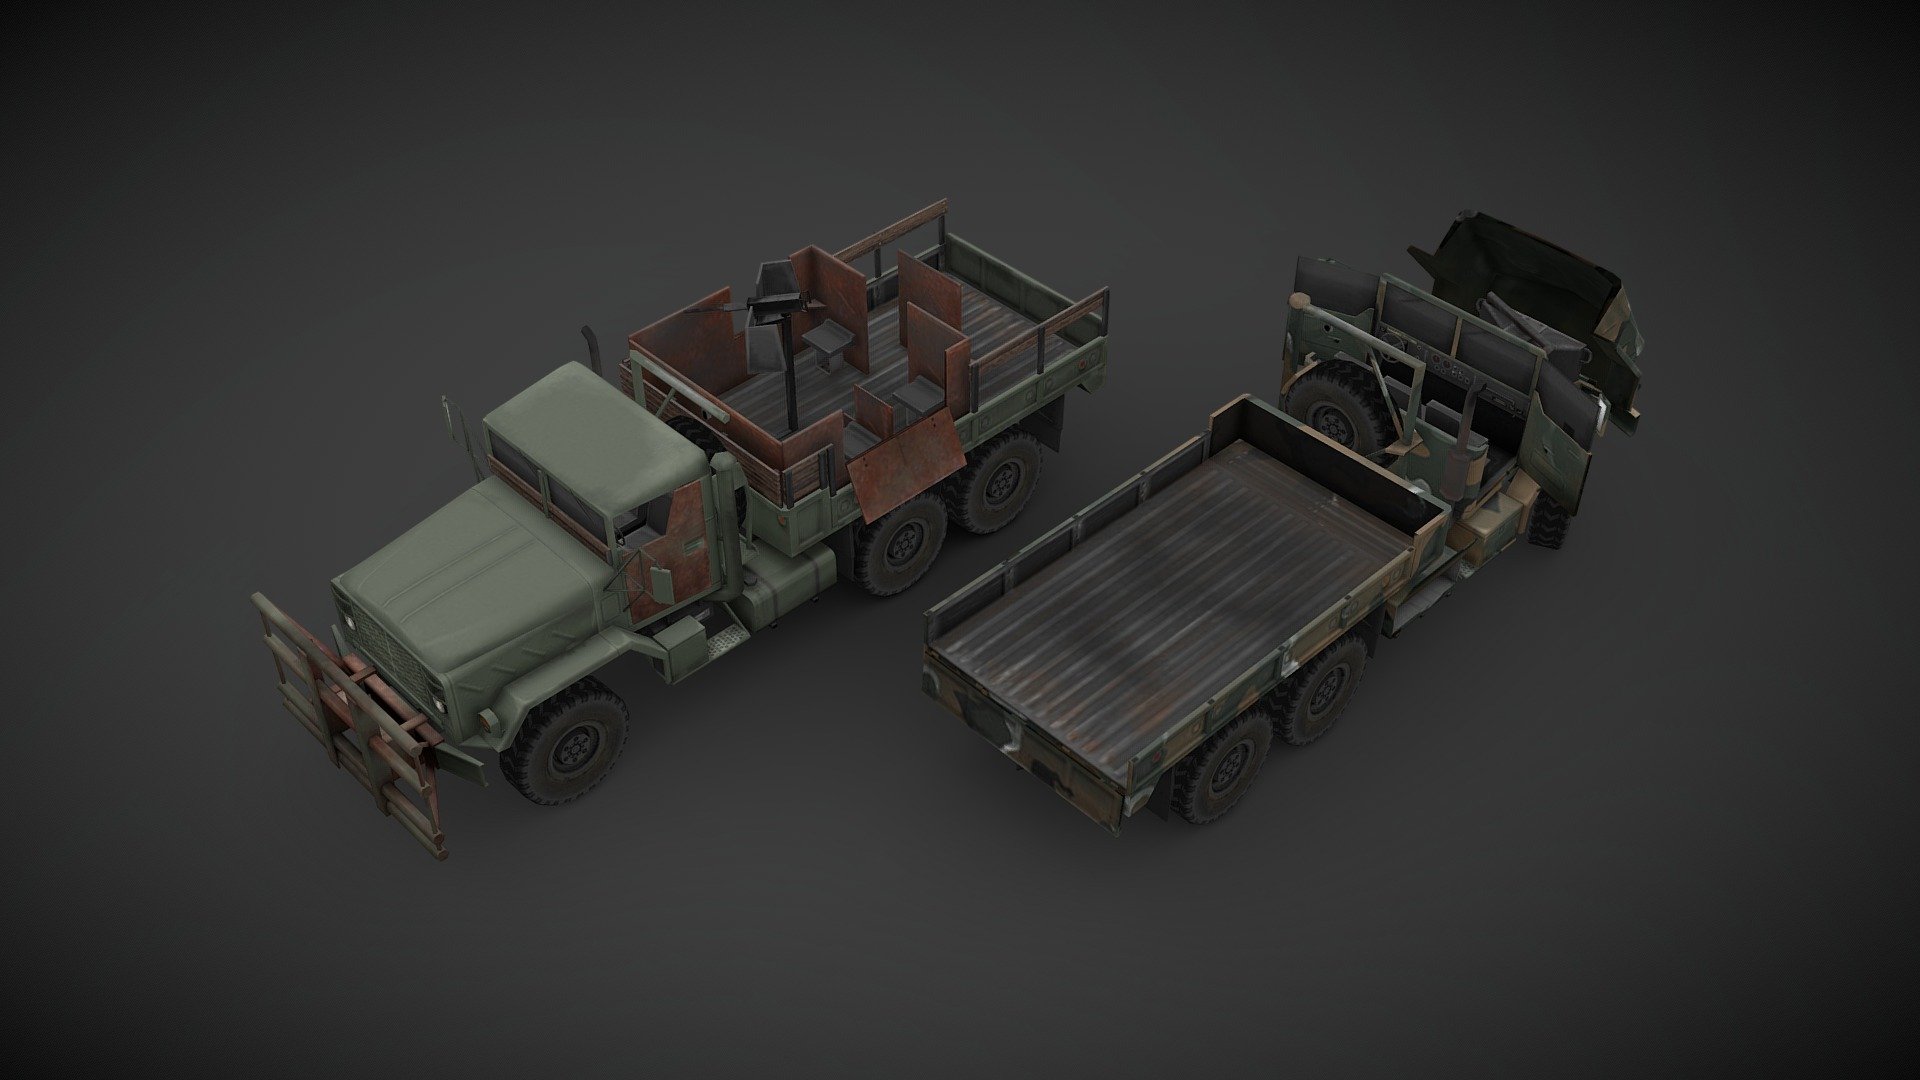 Showcase of the 1983 AM General M923 Military Truck, nicknamed Hillbilly because of it's improvised armor made of oxidised steel plates. I’ve made it for project ZOMBOID, low poly but with a high detail texture, optimized for game engine. This version is not a 100% true to the original since there are some compromises I’ve had to make to present it here.

You can find the actual version in project ZOMBOID STEAM Workshop 3d model